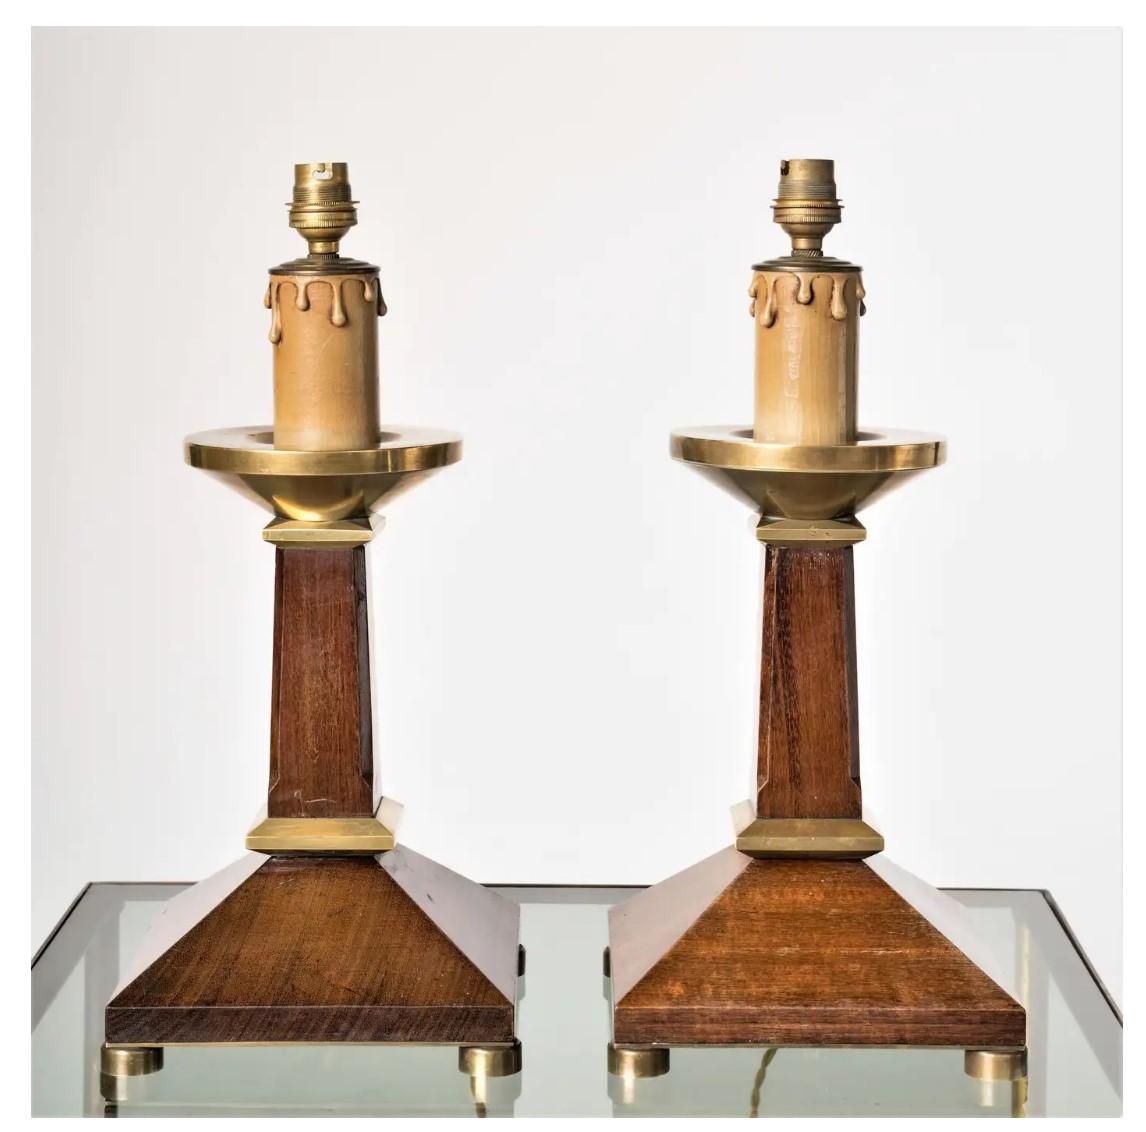 Elegant pair of 1960s French neoclassical style table lamps. Mahogany and brass accents. Faux candle socket decor. Price includes rewiring for the US. Minor dent on one of the lamps as shown on pictures (on the back side). Minor scratches. Else in